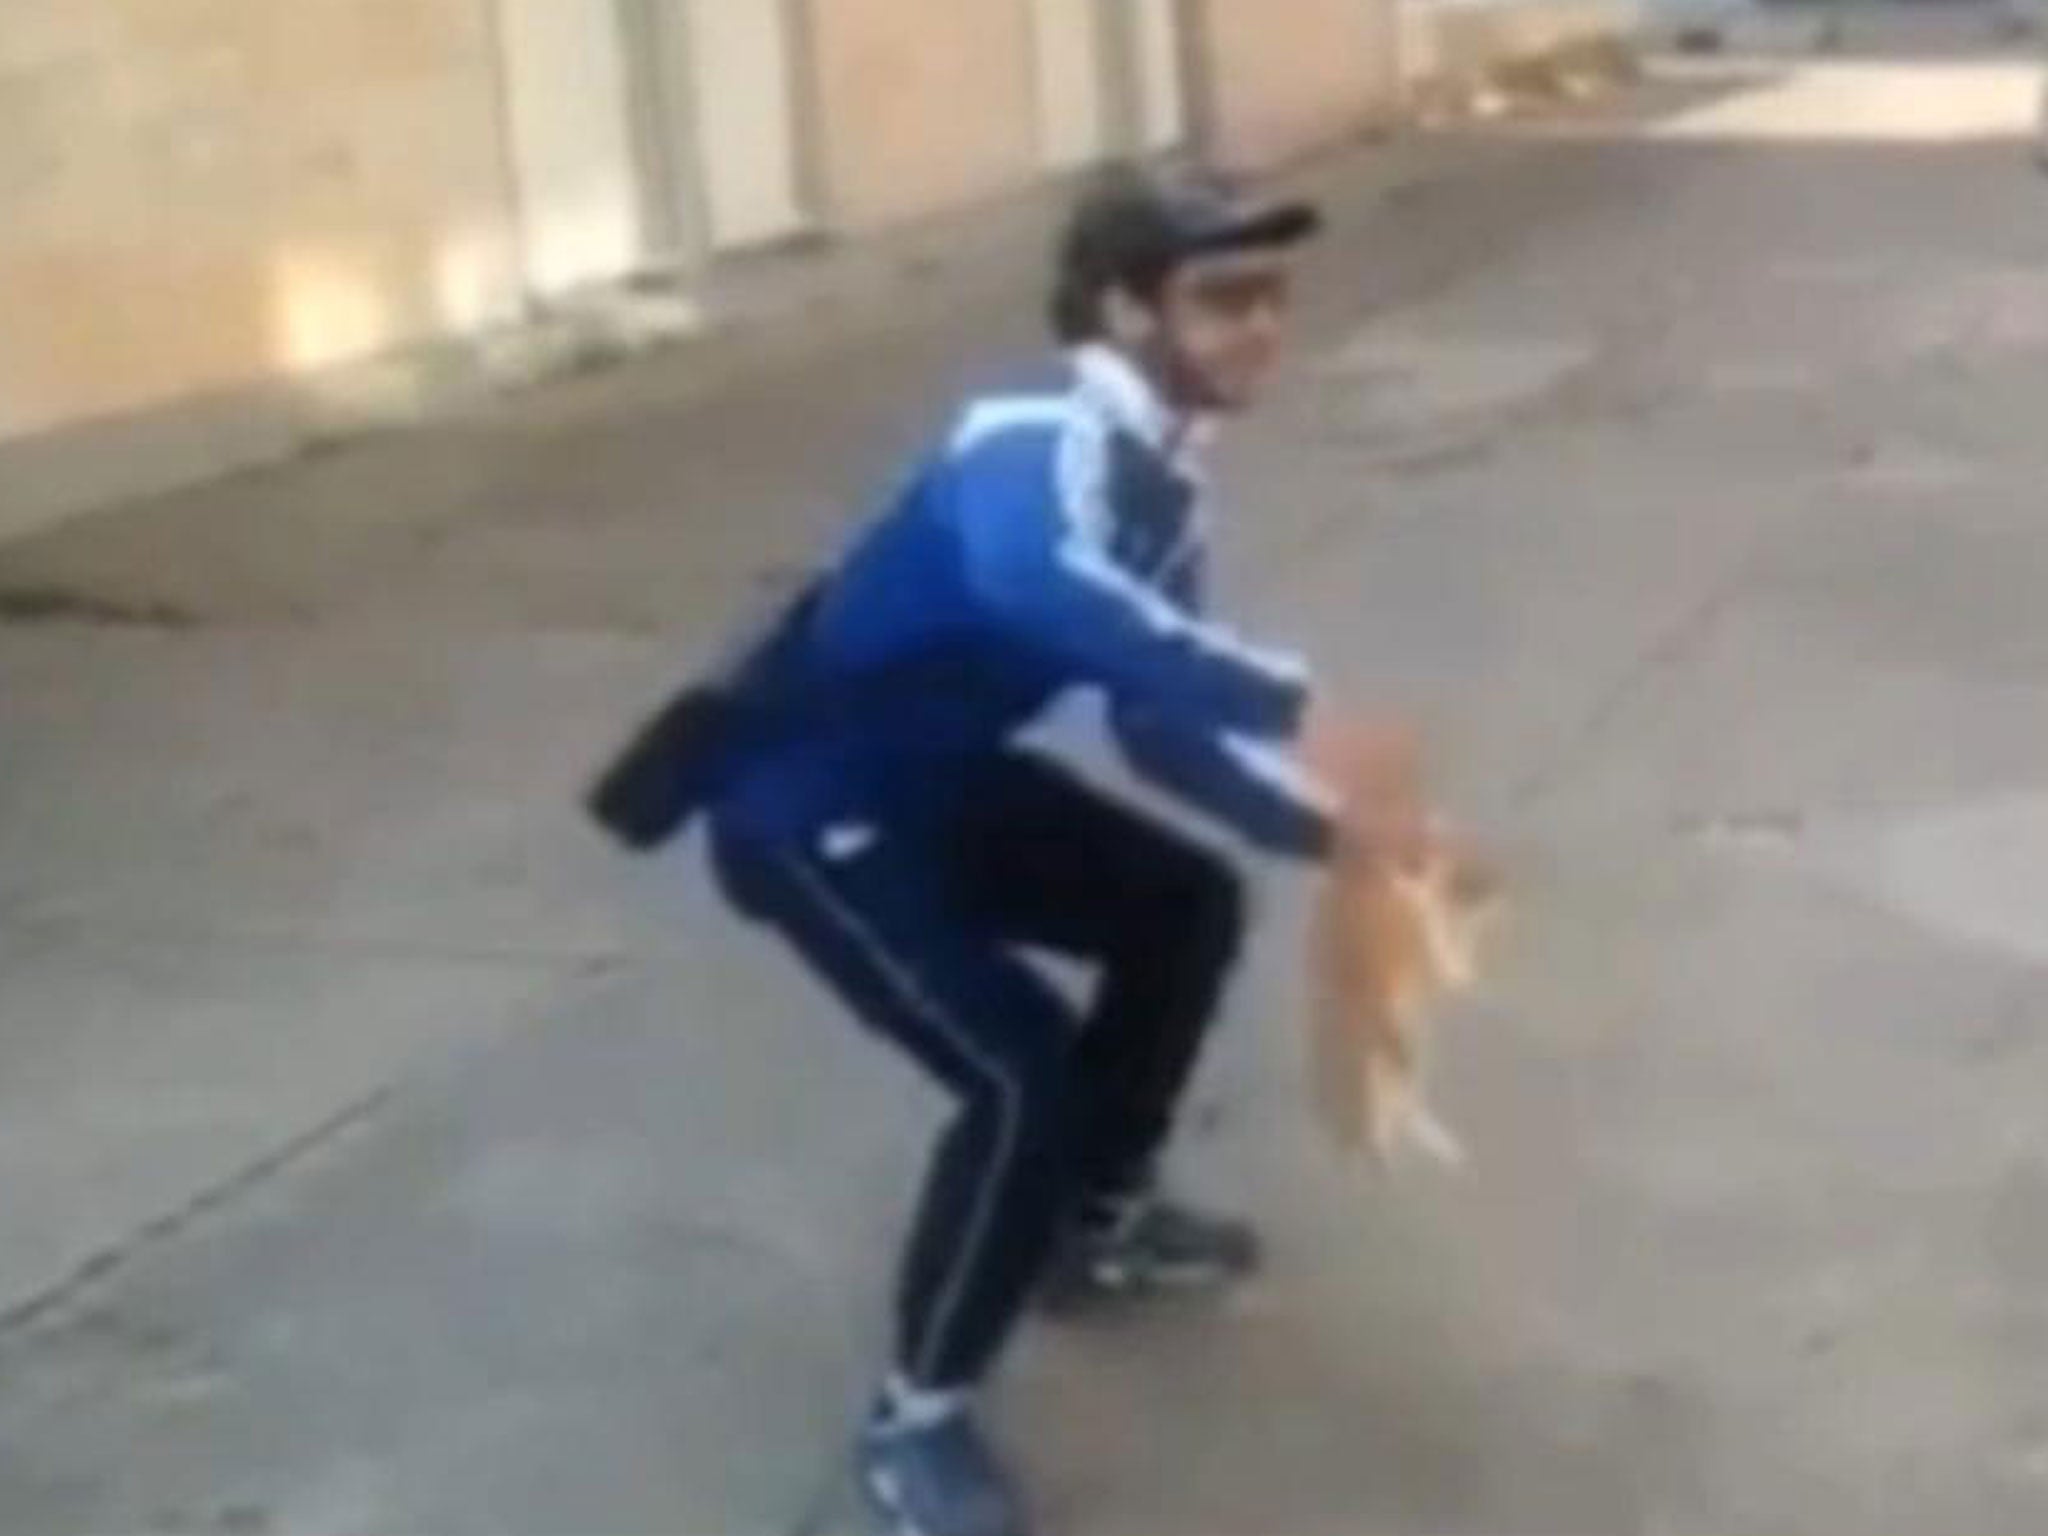 A still from the video showing Farid Ghilad throwing the cat against a block of flats